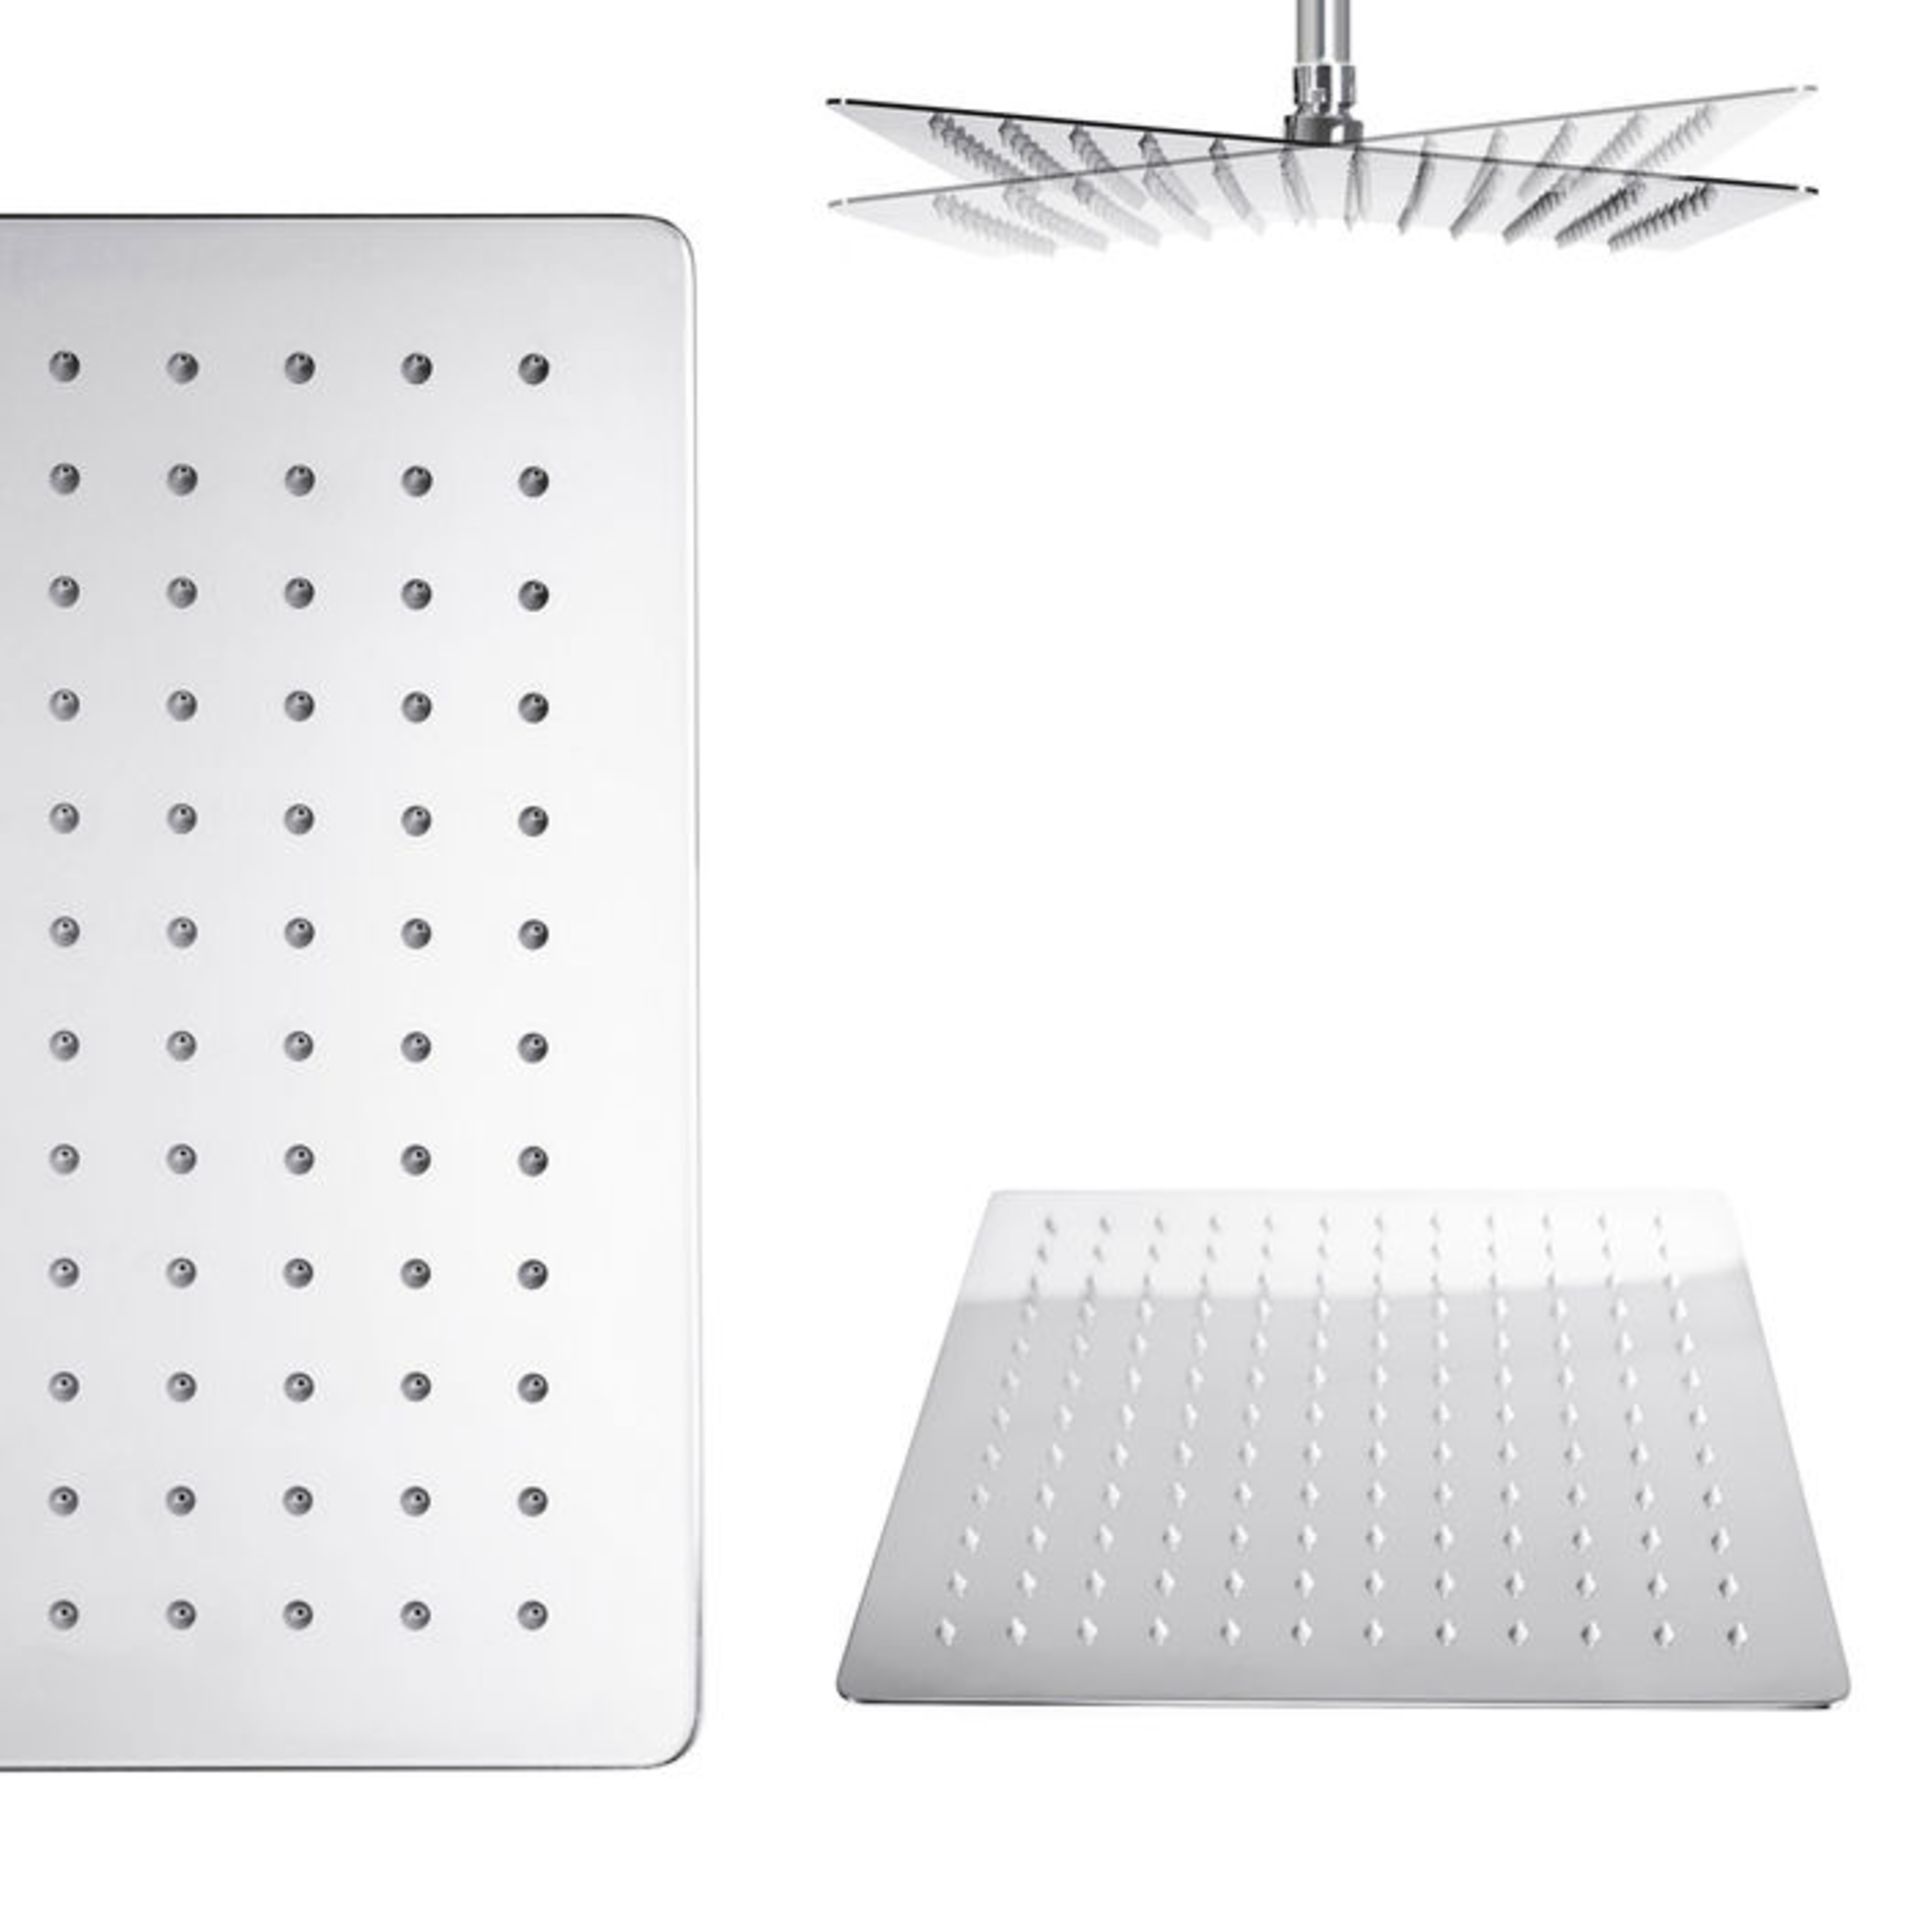 (SM17) Stainless Steel 300mm Square Shower Head. RRP £62.99. Solid metal structure Can be wall or